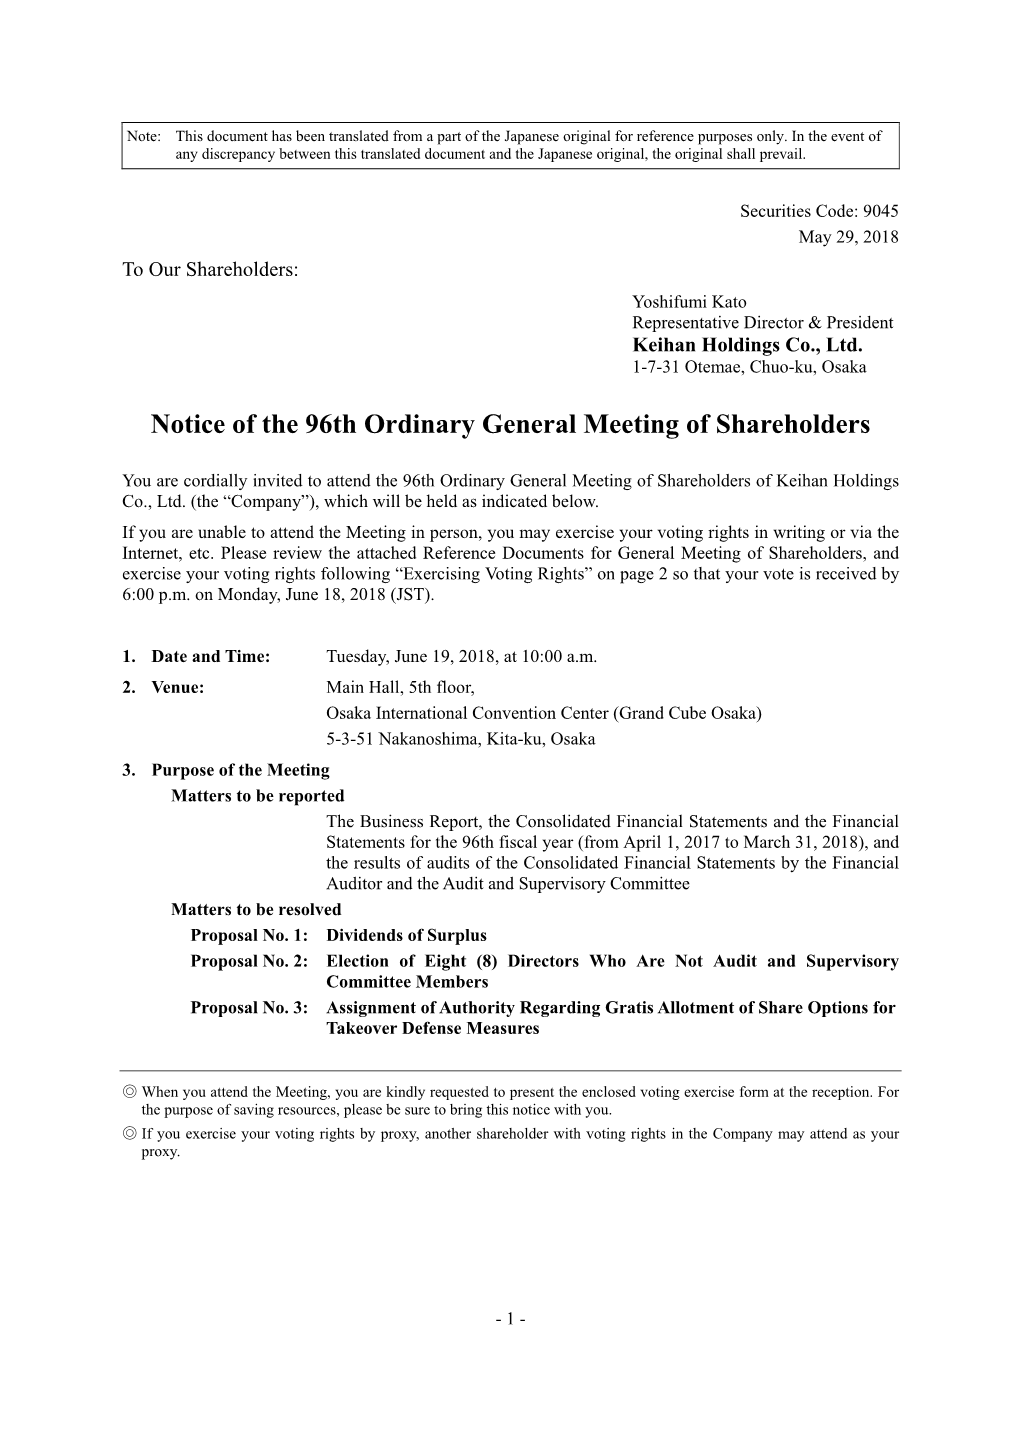 Notice of the 96Th Ordinary General Meeting of Shareholders